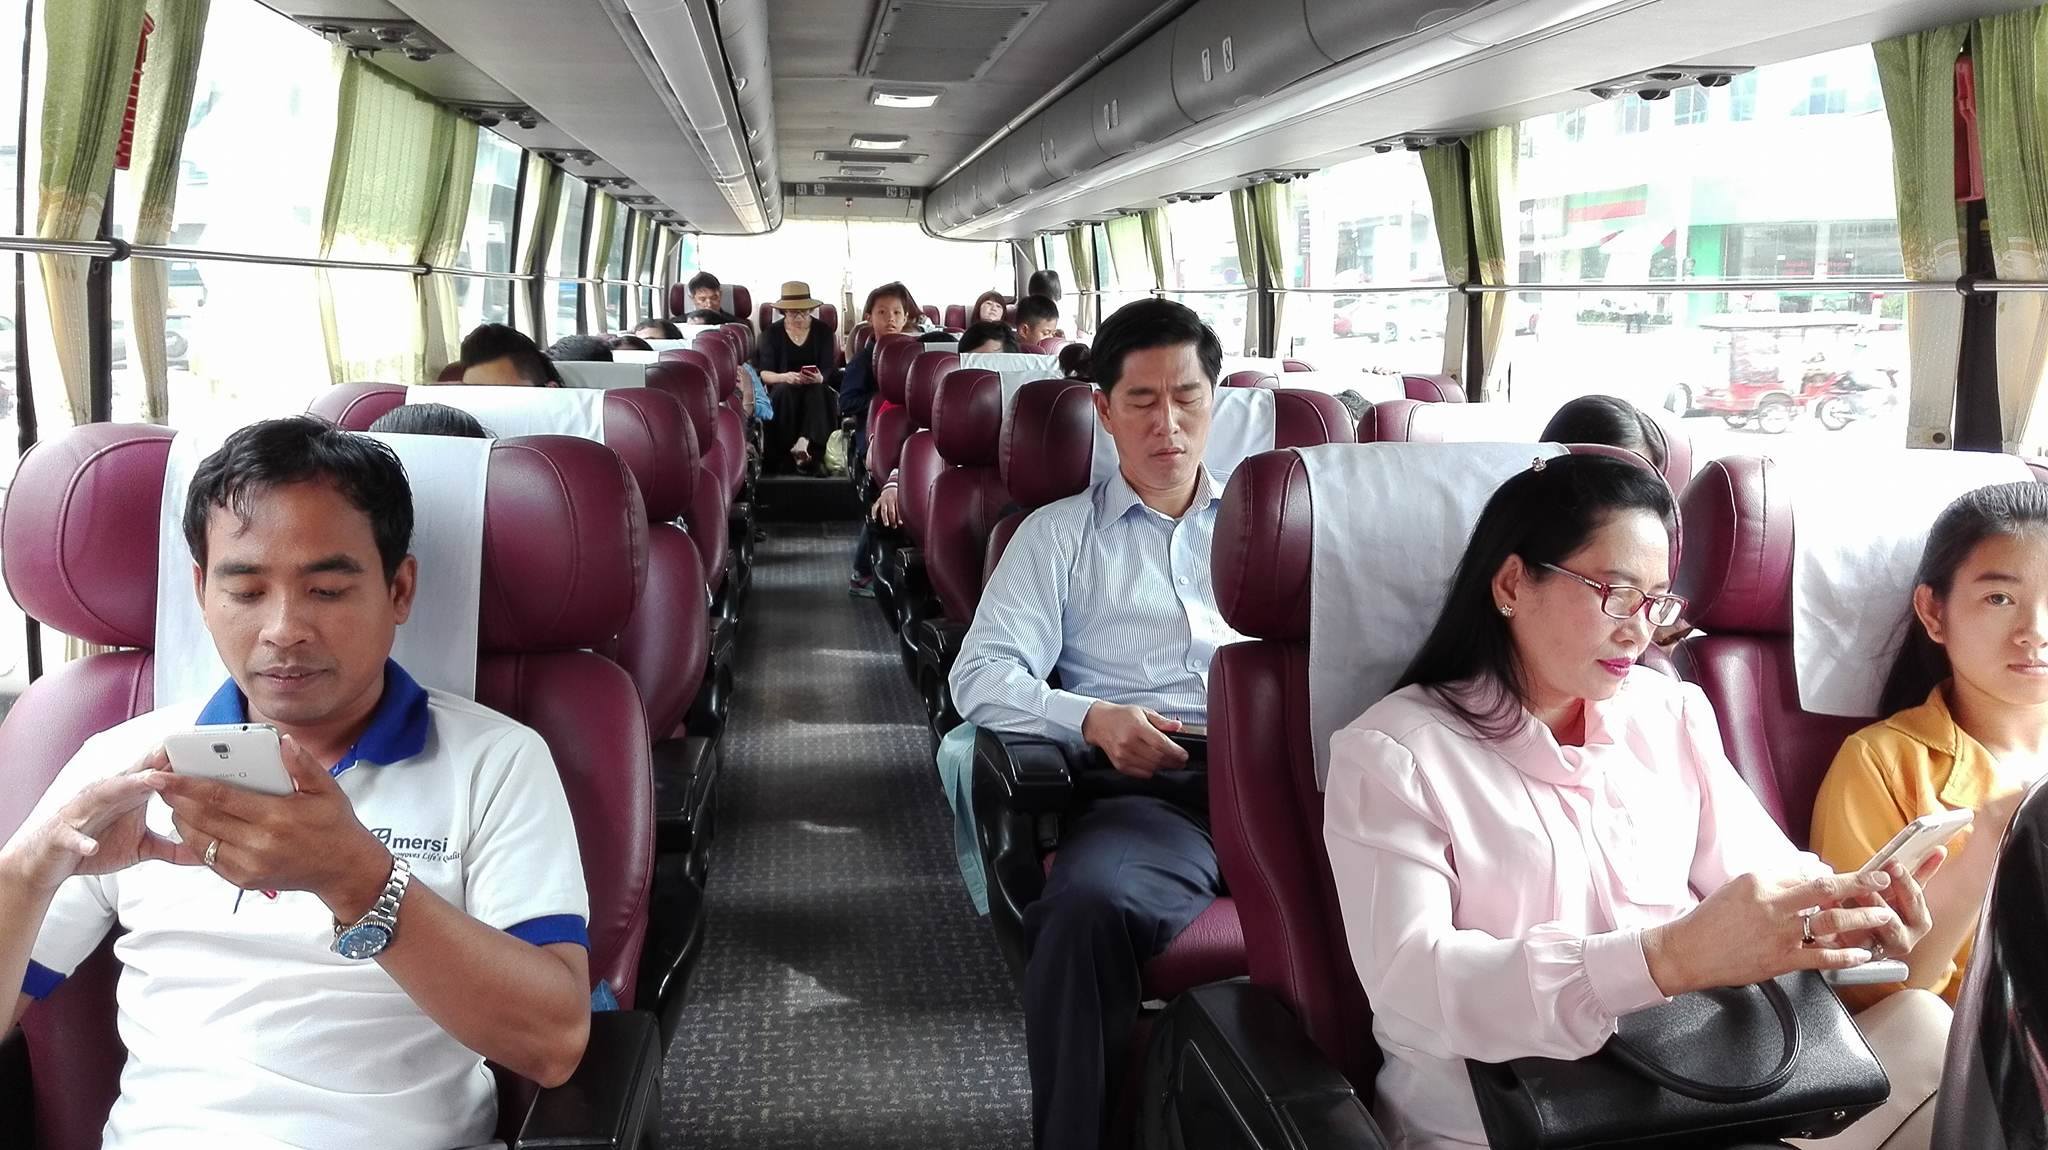 Thai Duong Limousine Air Bus offers luxury travel in Cambodia and Viet Nam